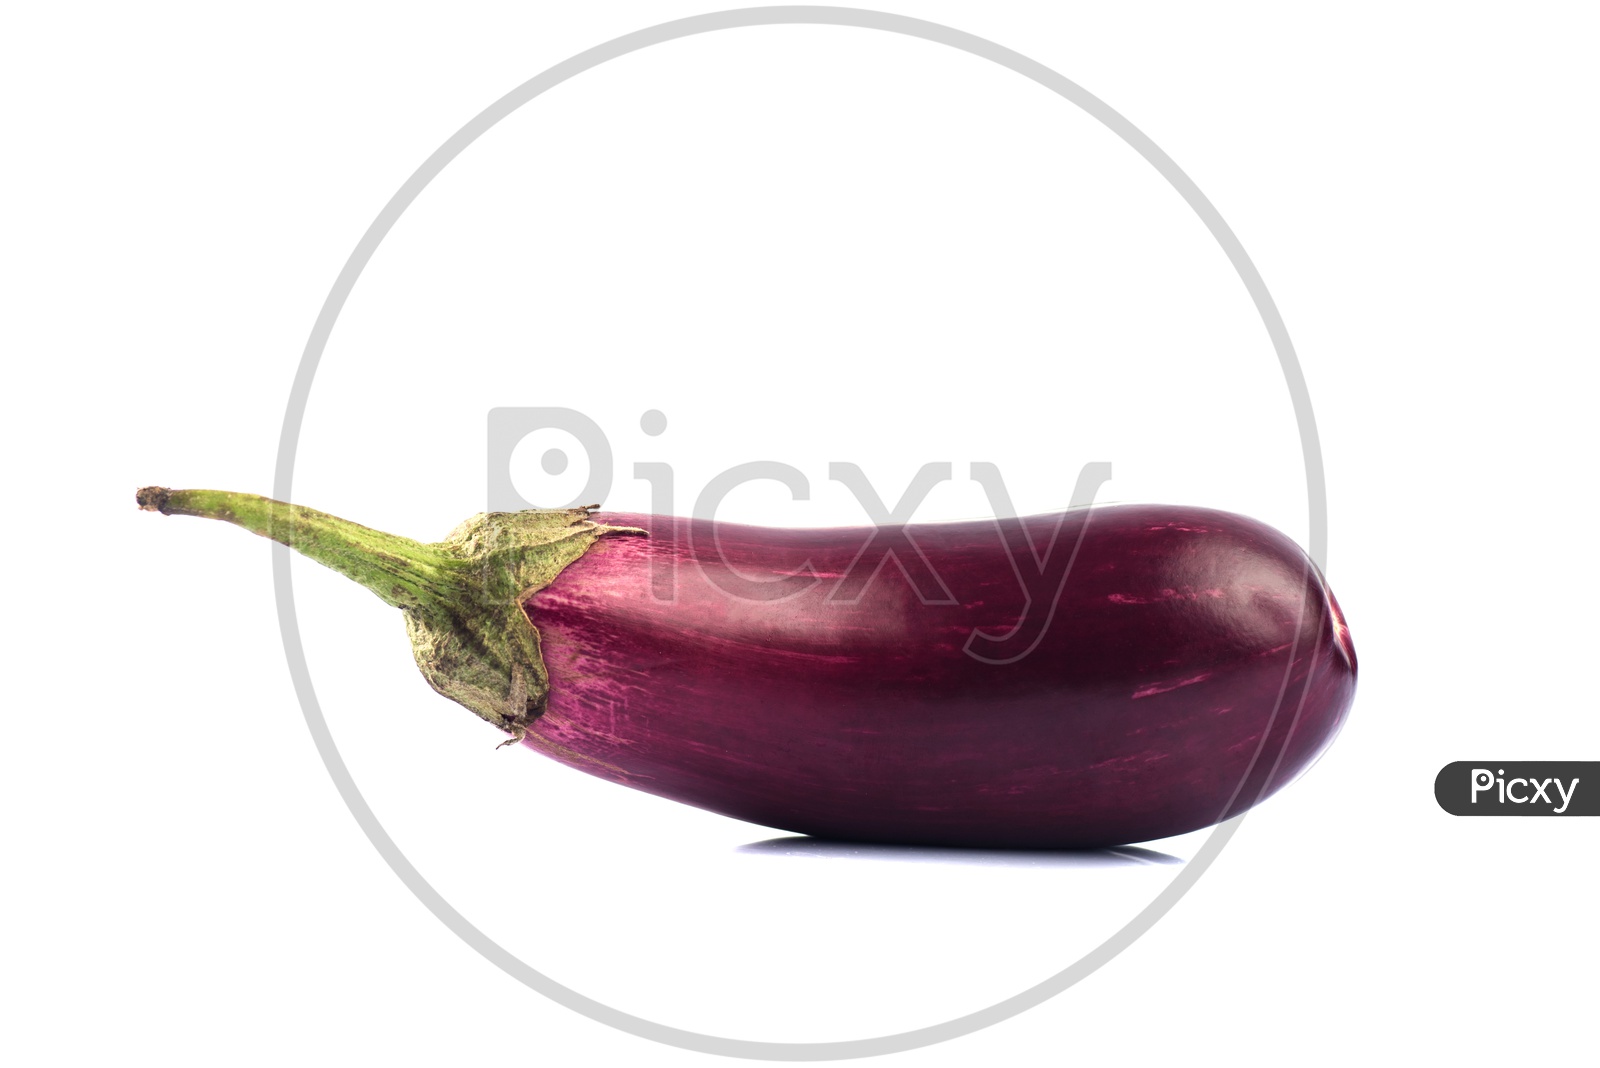 Egg Plant Or Brinjal Or Baigan Or Aubergine Vegetable on an Isolated White Background